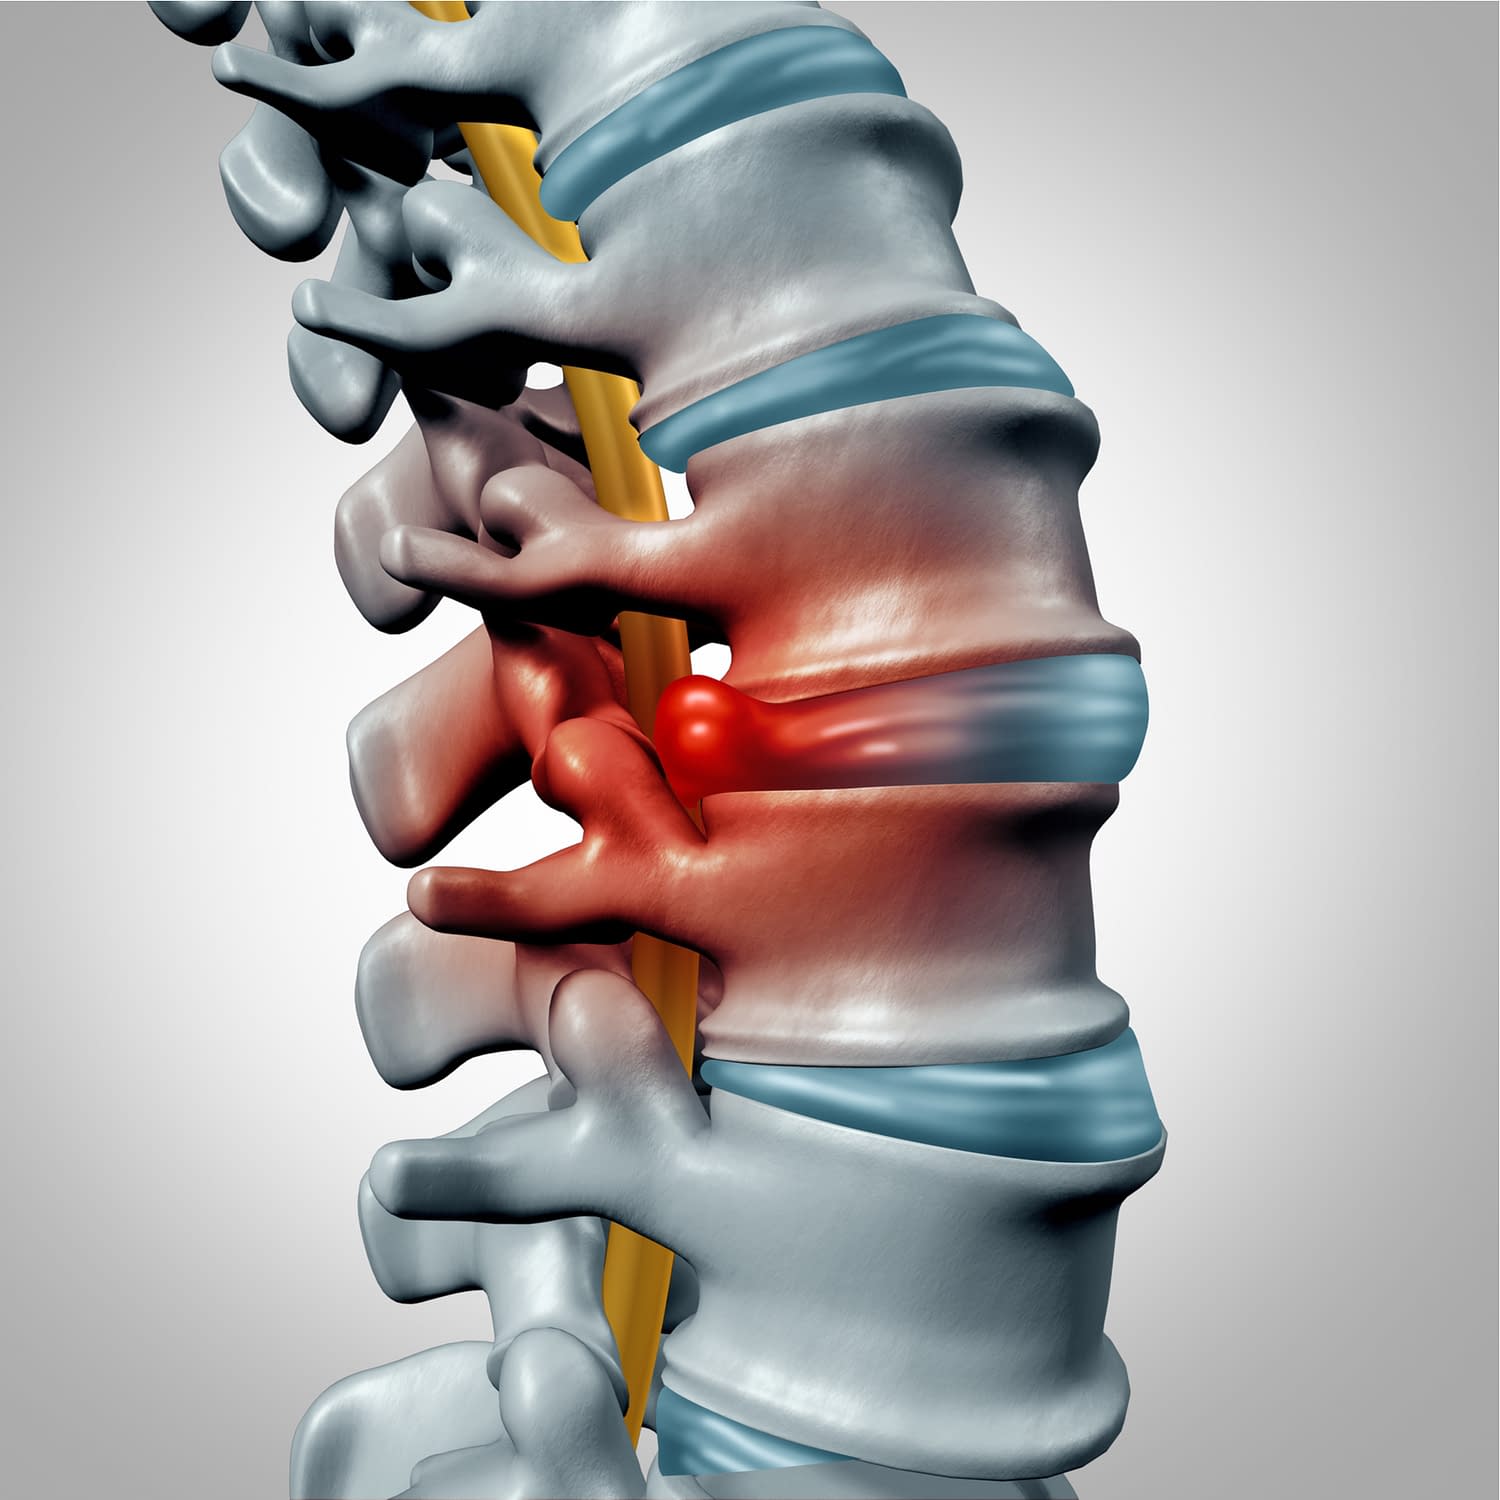 NJ Spine and Wellness offers its New Jersey clients disc injury treatments and rehabilitation for bulging or herniated discs